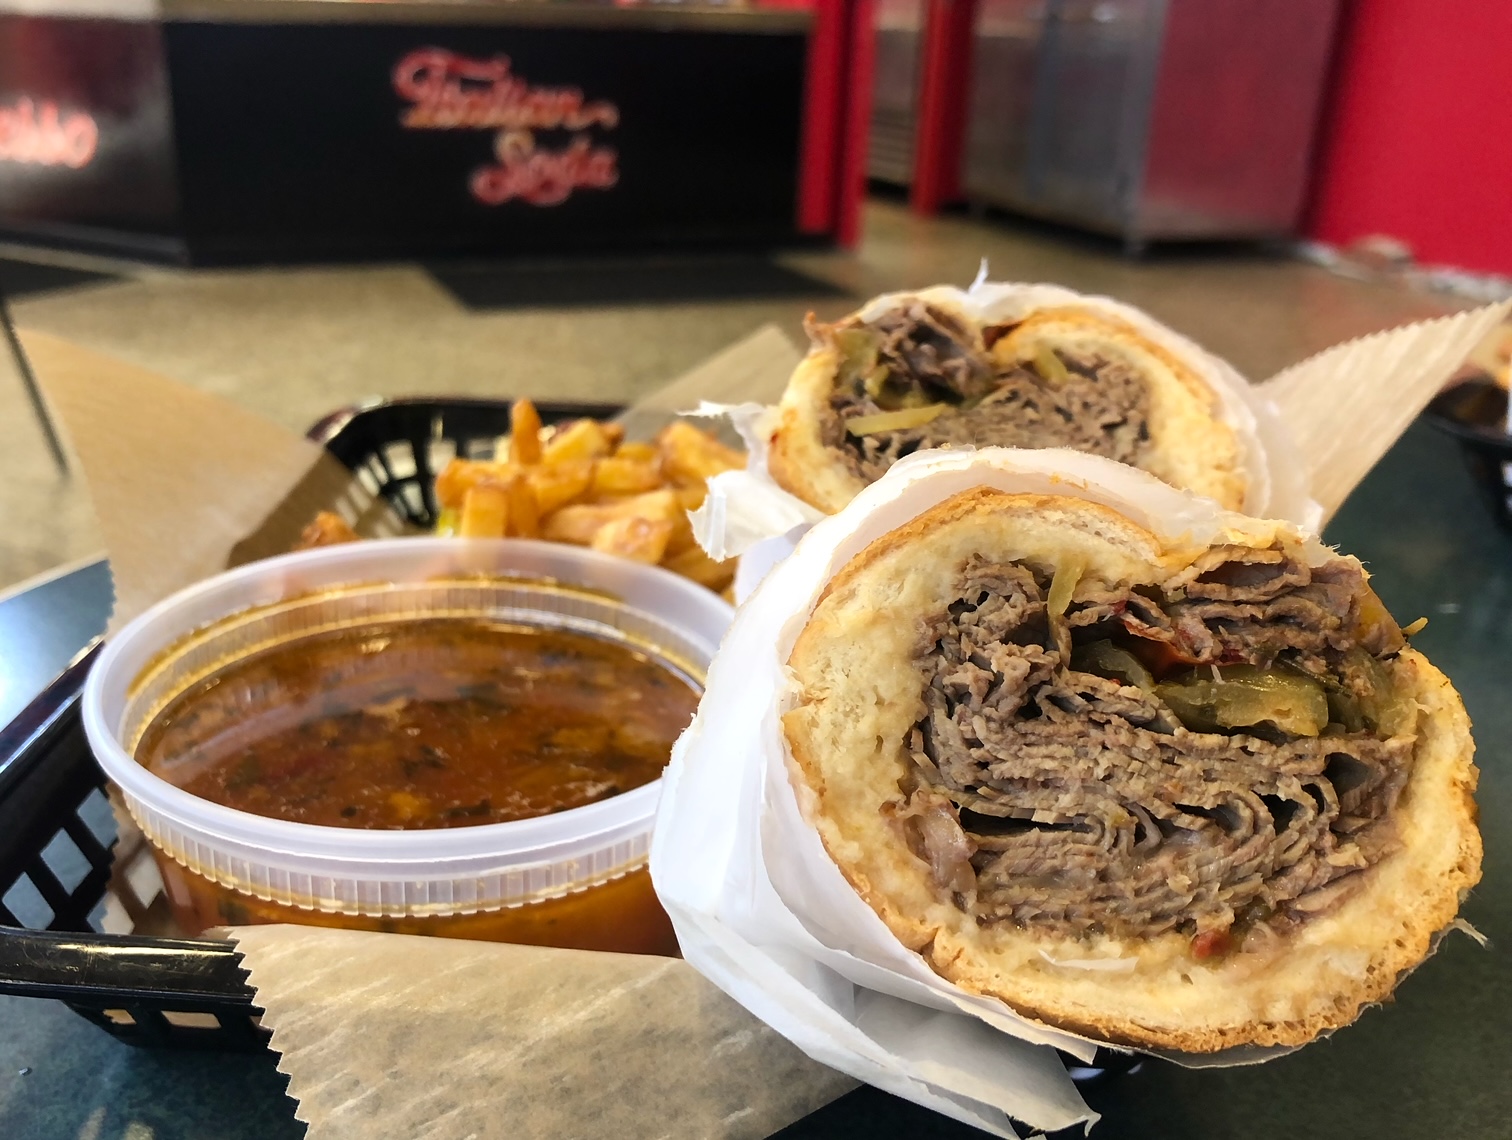 An Italian beef sandwich from Baldarotta's in Urbana, Illinois is sliced in half on a plastic tray. There is a large container of au jus beside it and a side of fries. Photo by Alyssa Buckley.